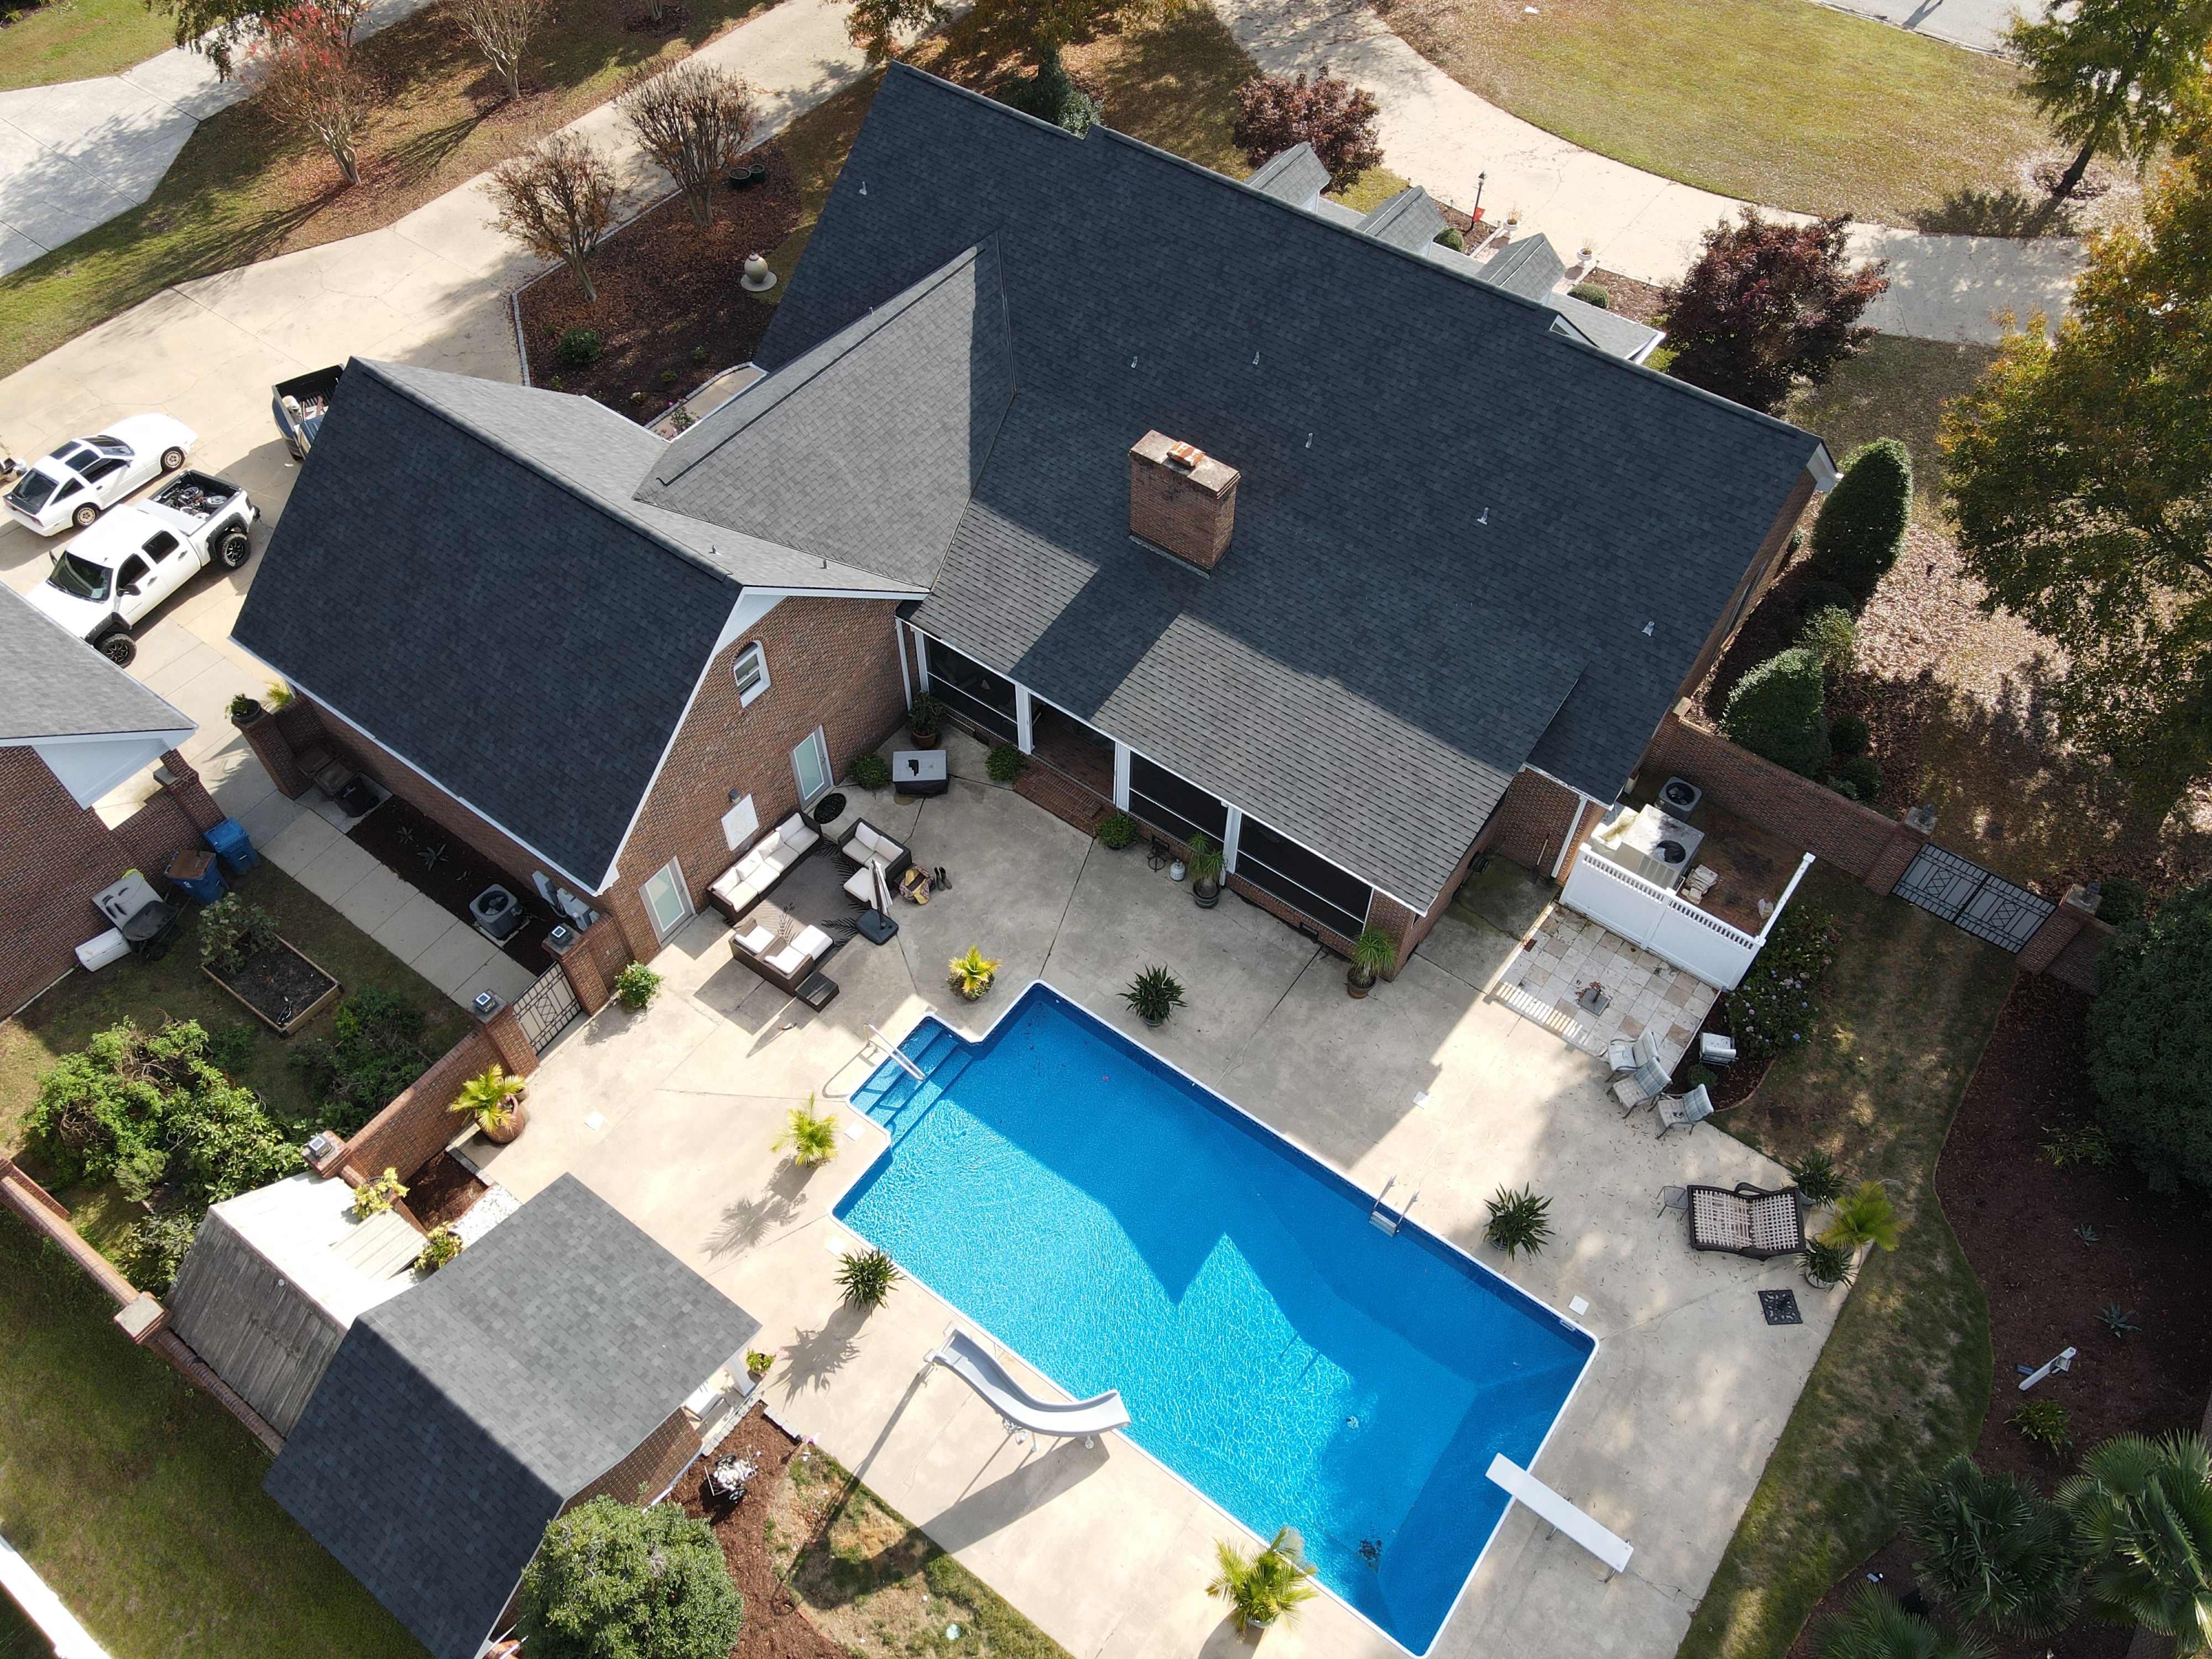 Roofing for Halo Roofing & Renovations in Benson, NC